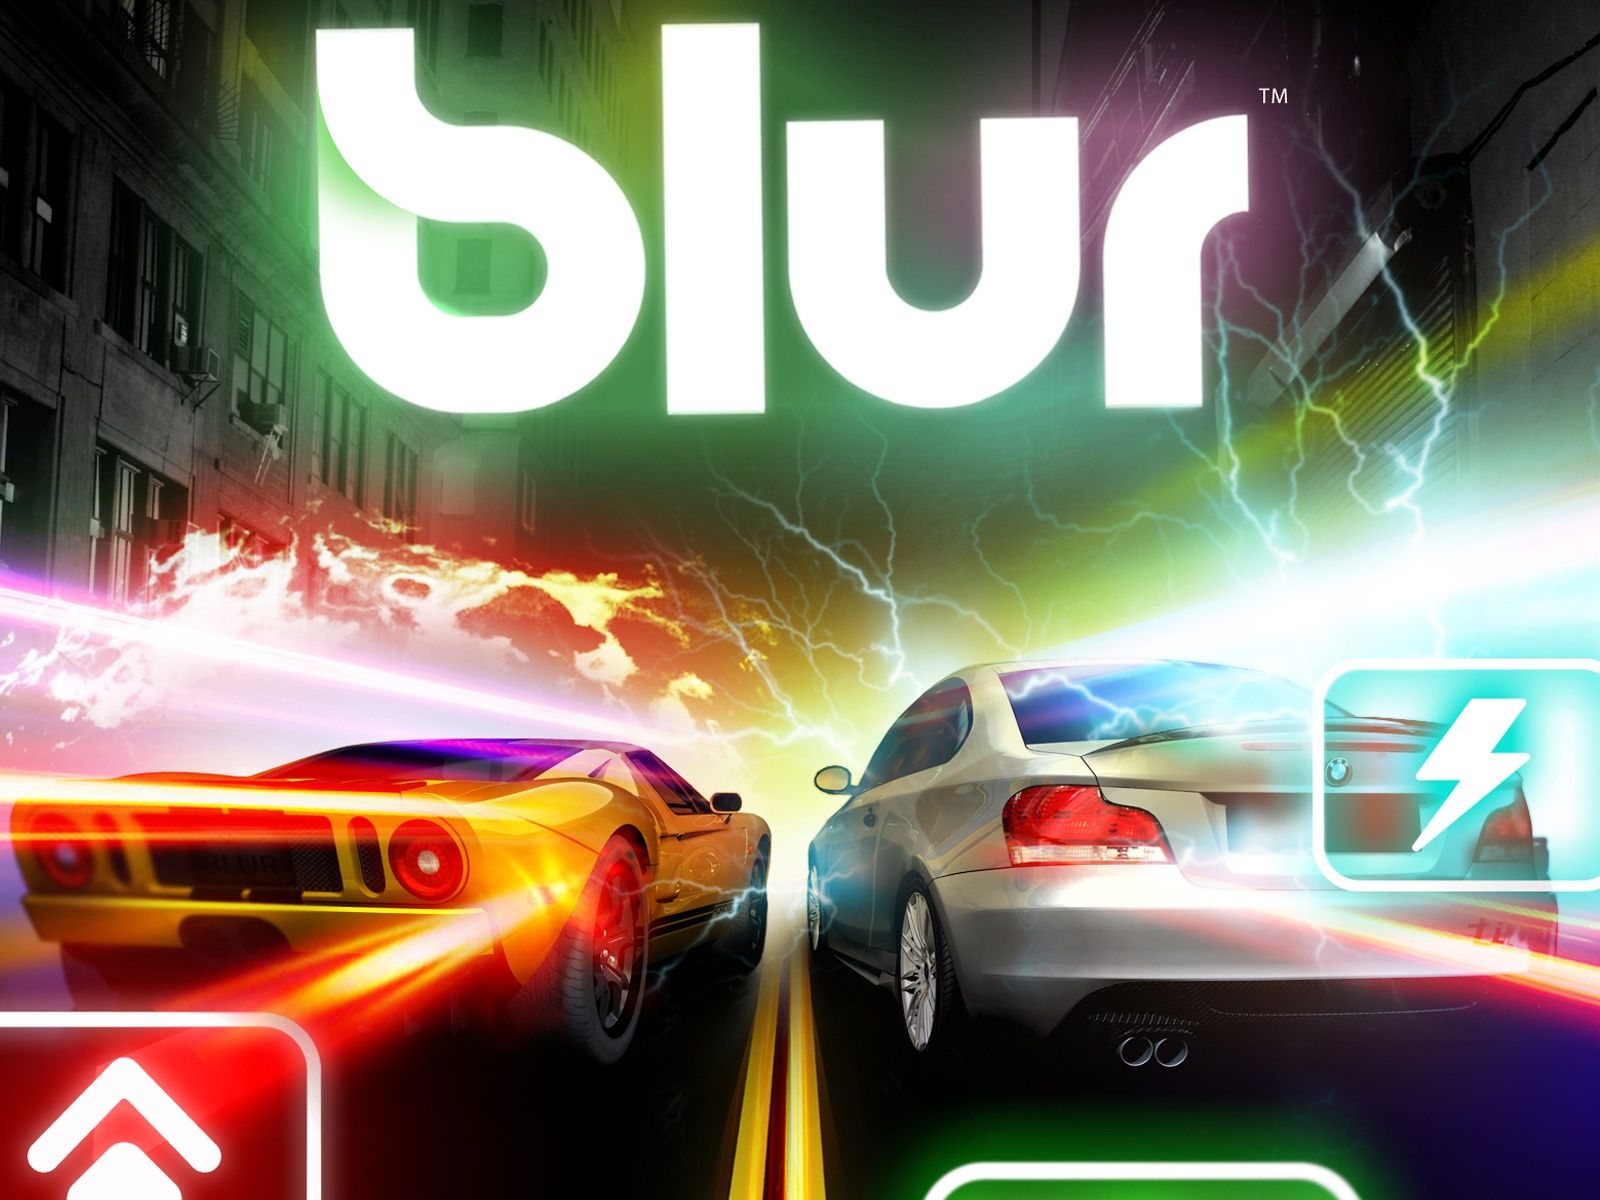 Blur Game Xbox PS3 PC Wallpaper in jpg format for free download